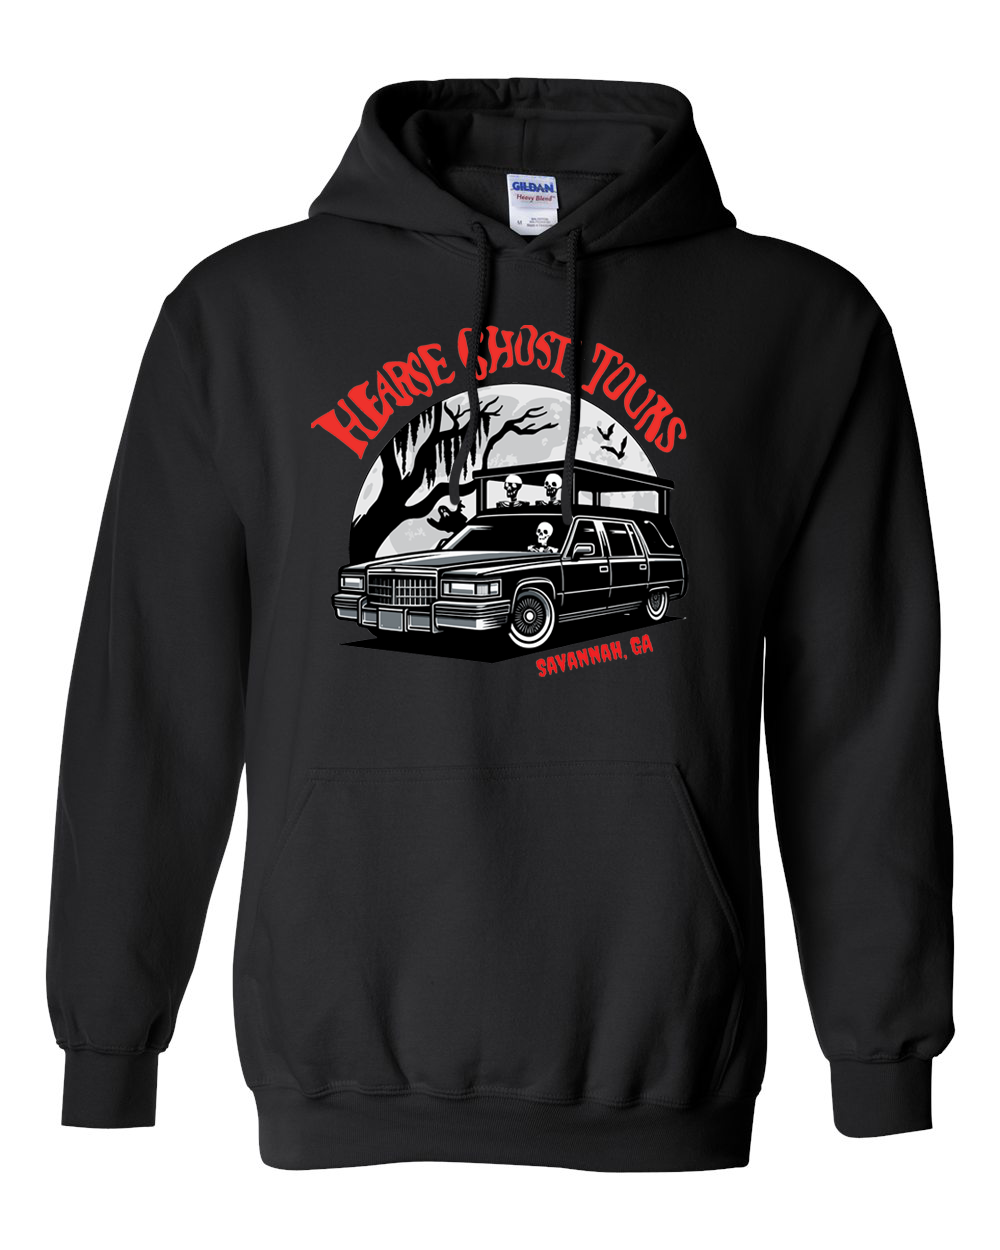 Hearse Ghost Tour “Black and Red” Unisex Hooded Pullover Sweatshirt